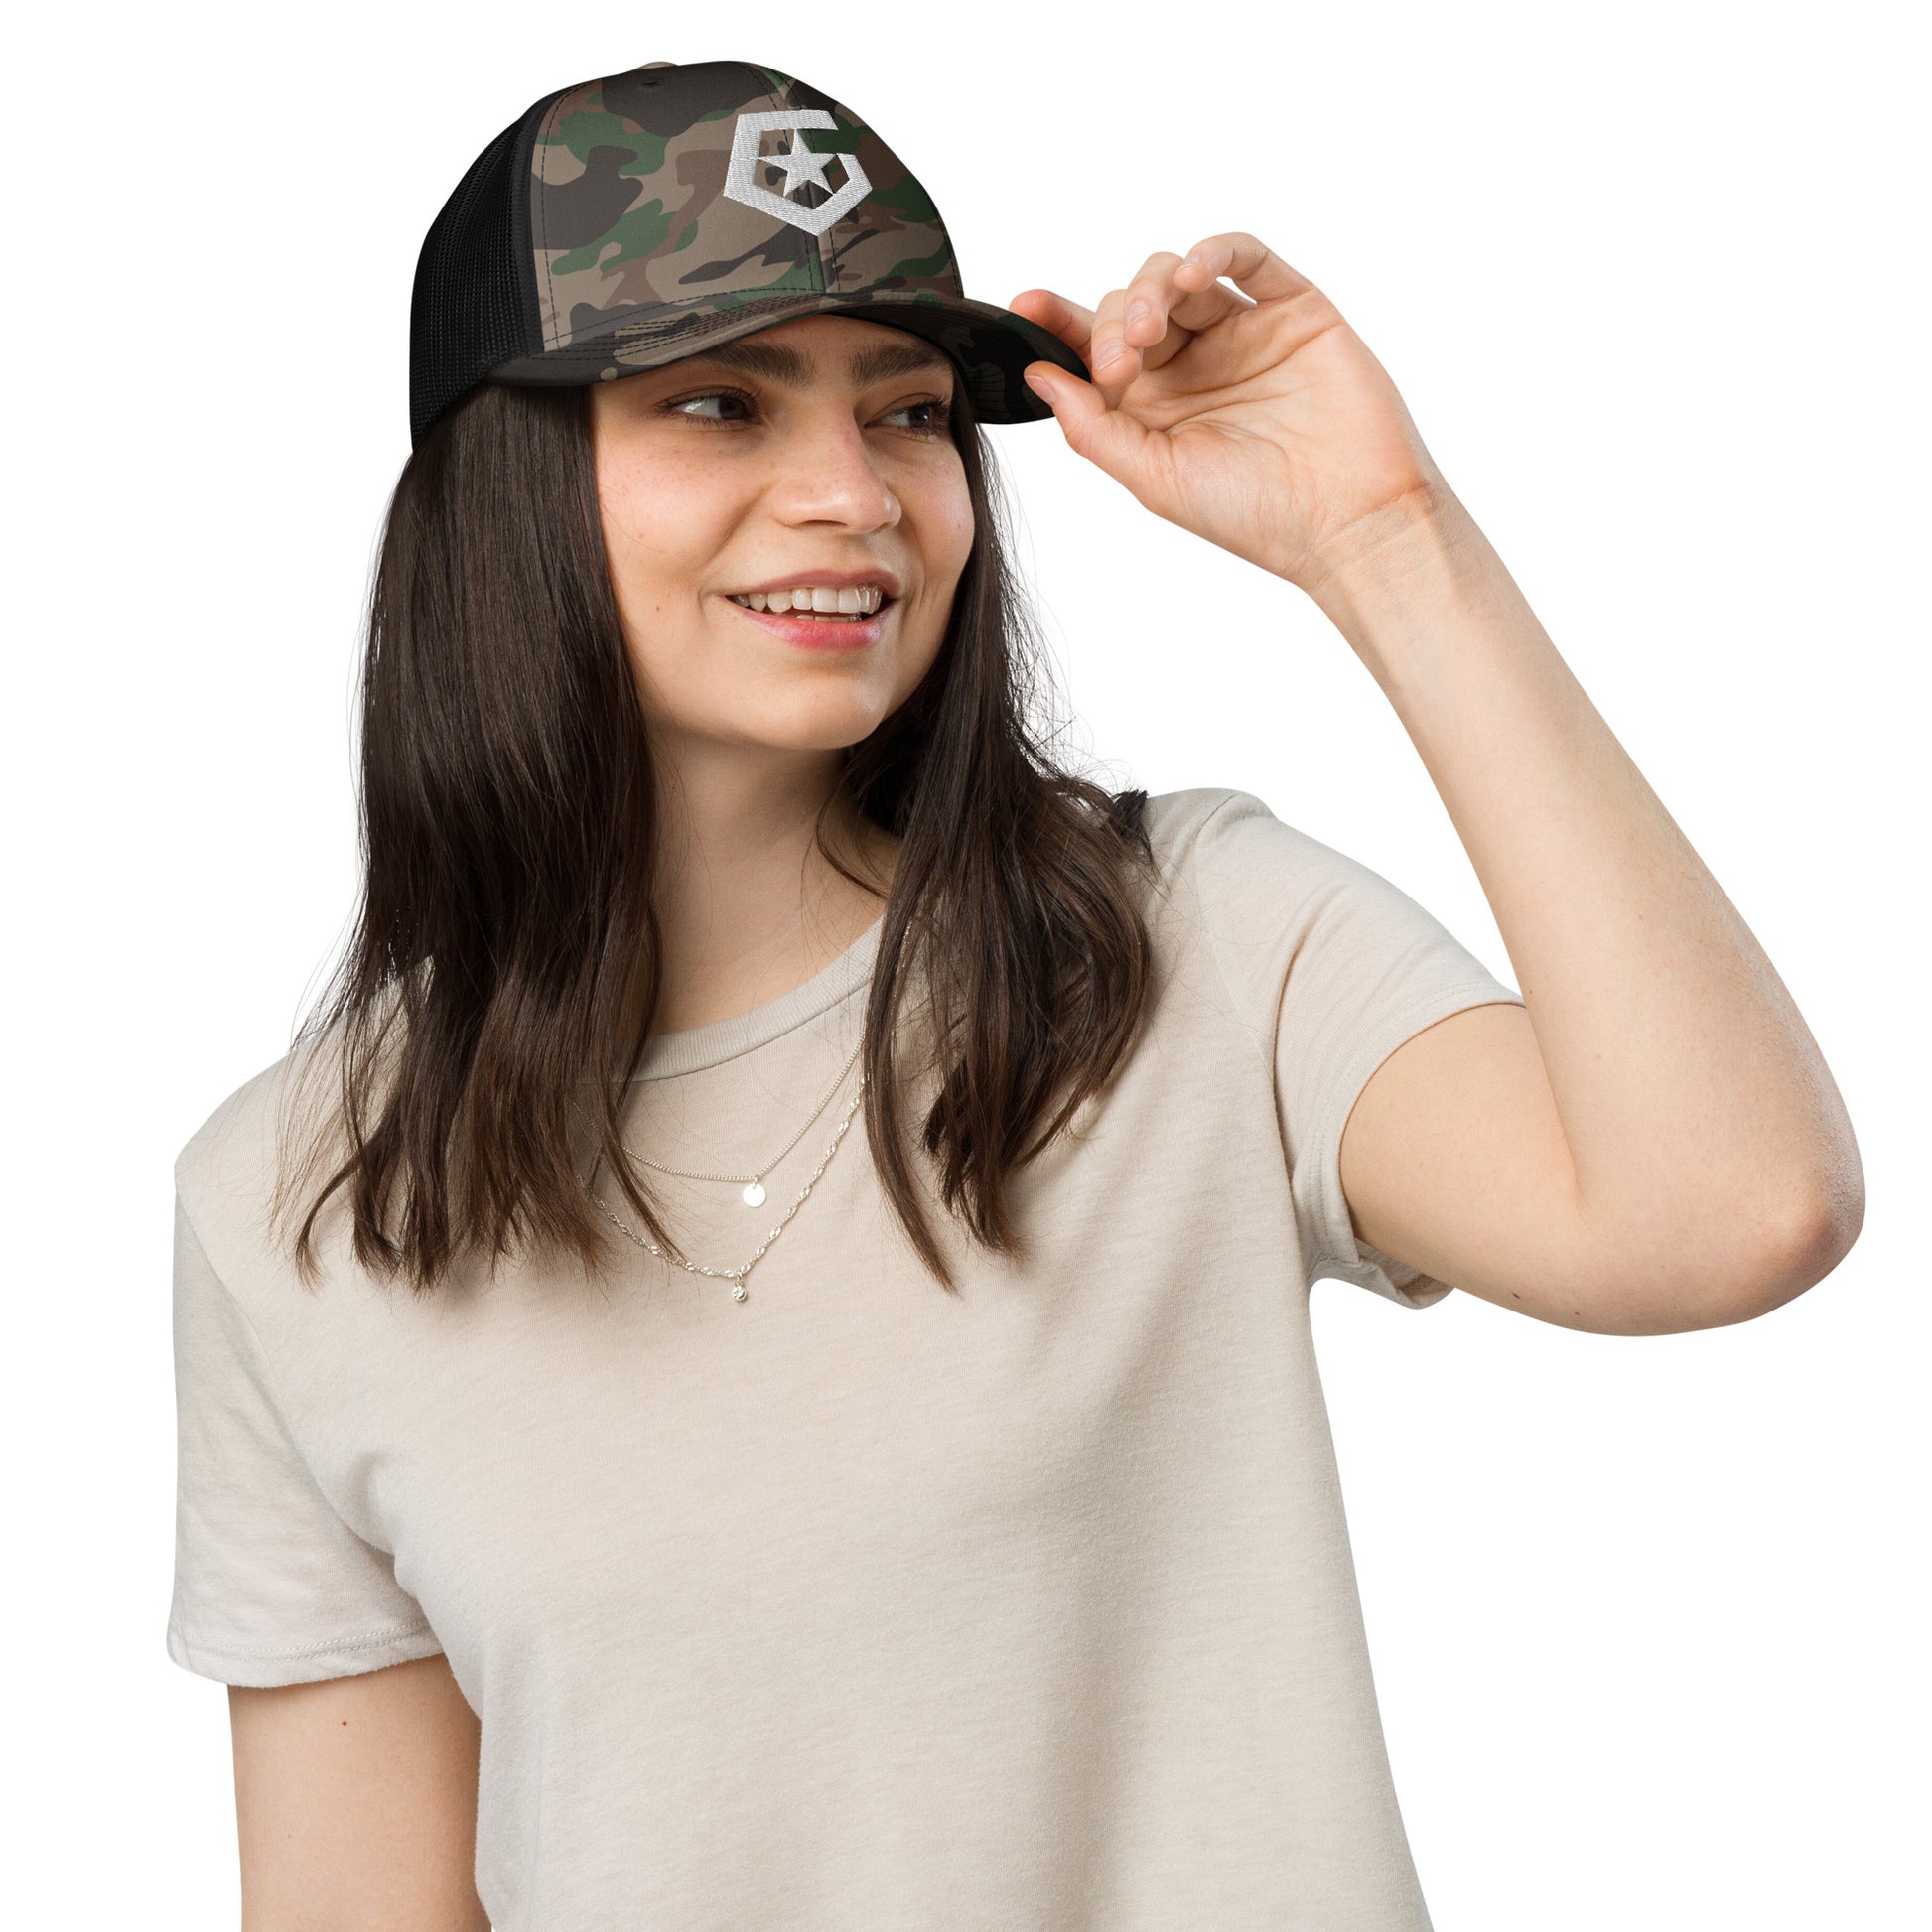 GENERAL STAR CAMO TRUCKER HAT - The Official General Booty Shop